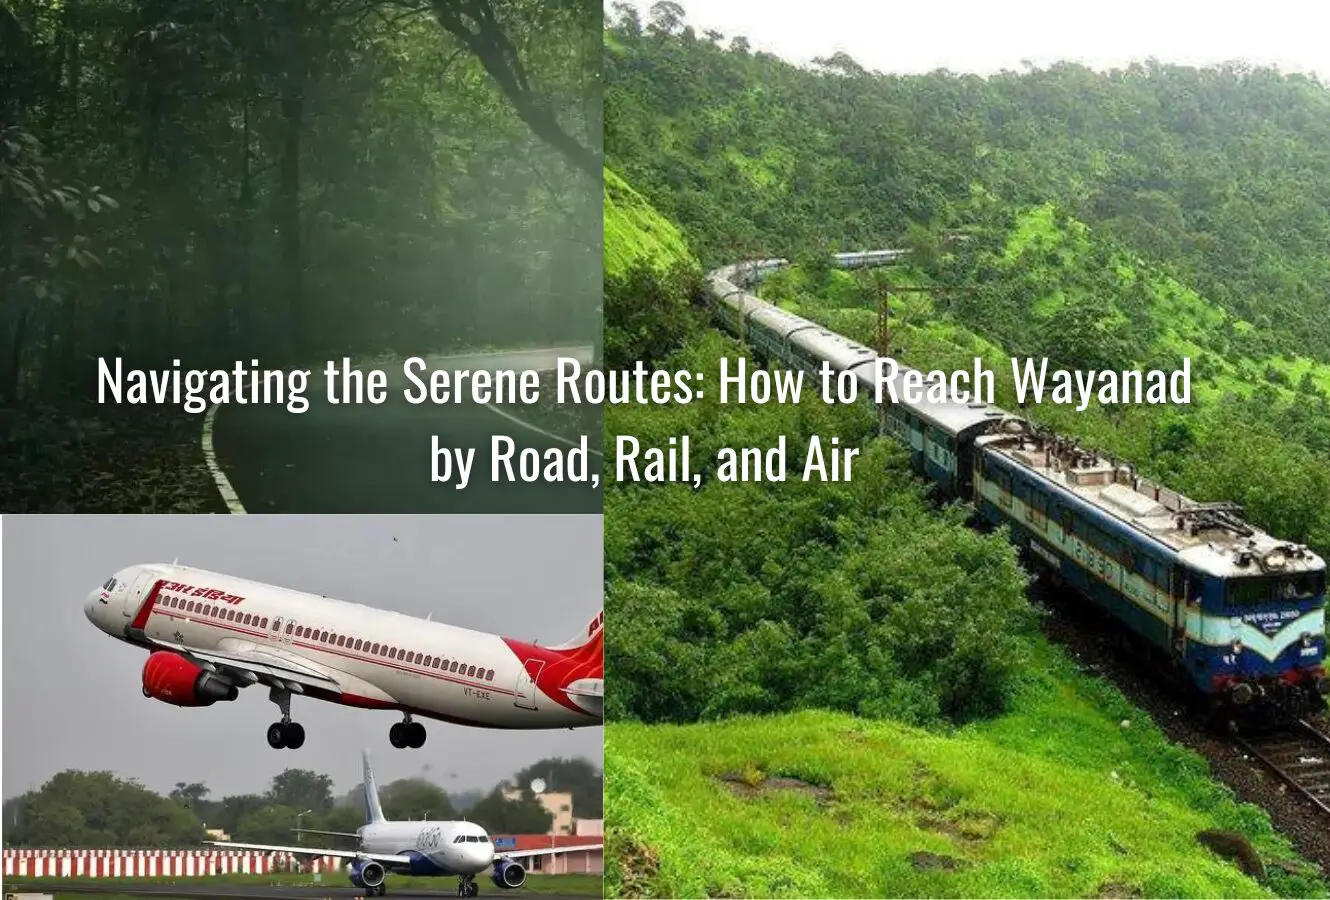 Navigating the Serene Routes: How to Reach Wayanad by Road, Rail, and Air